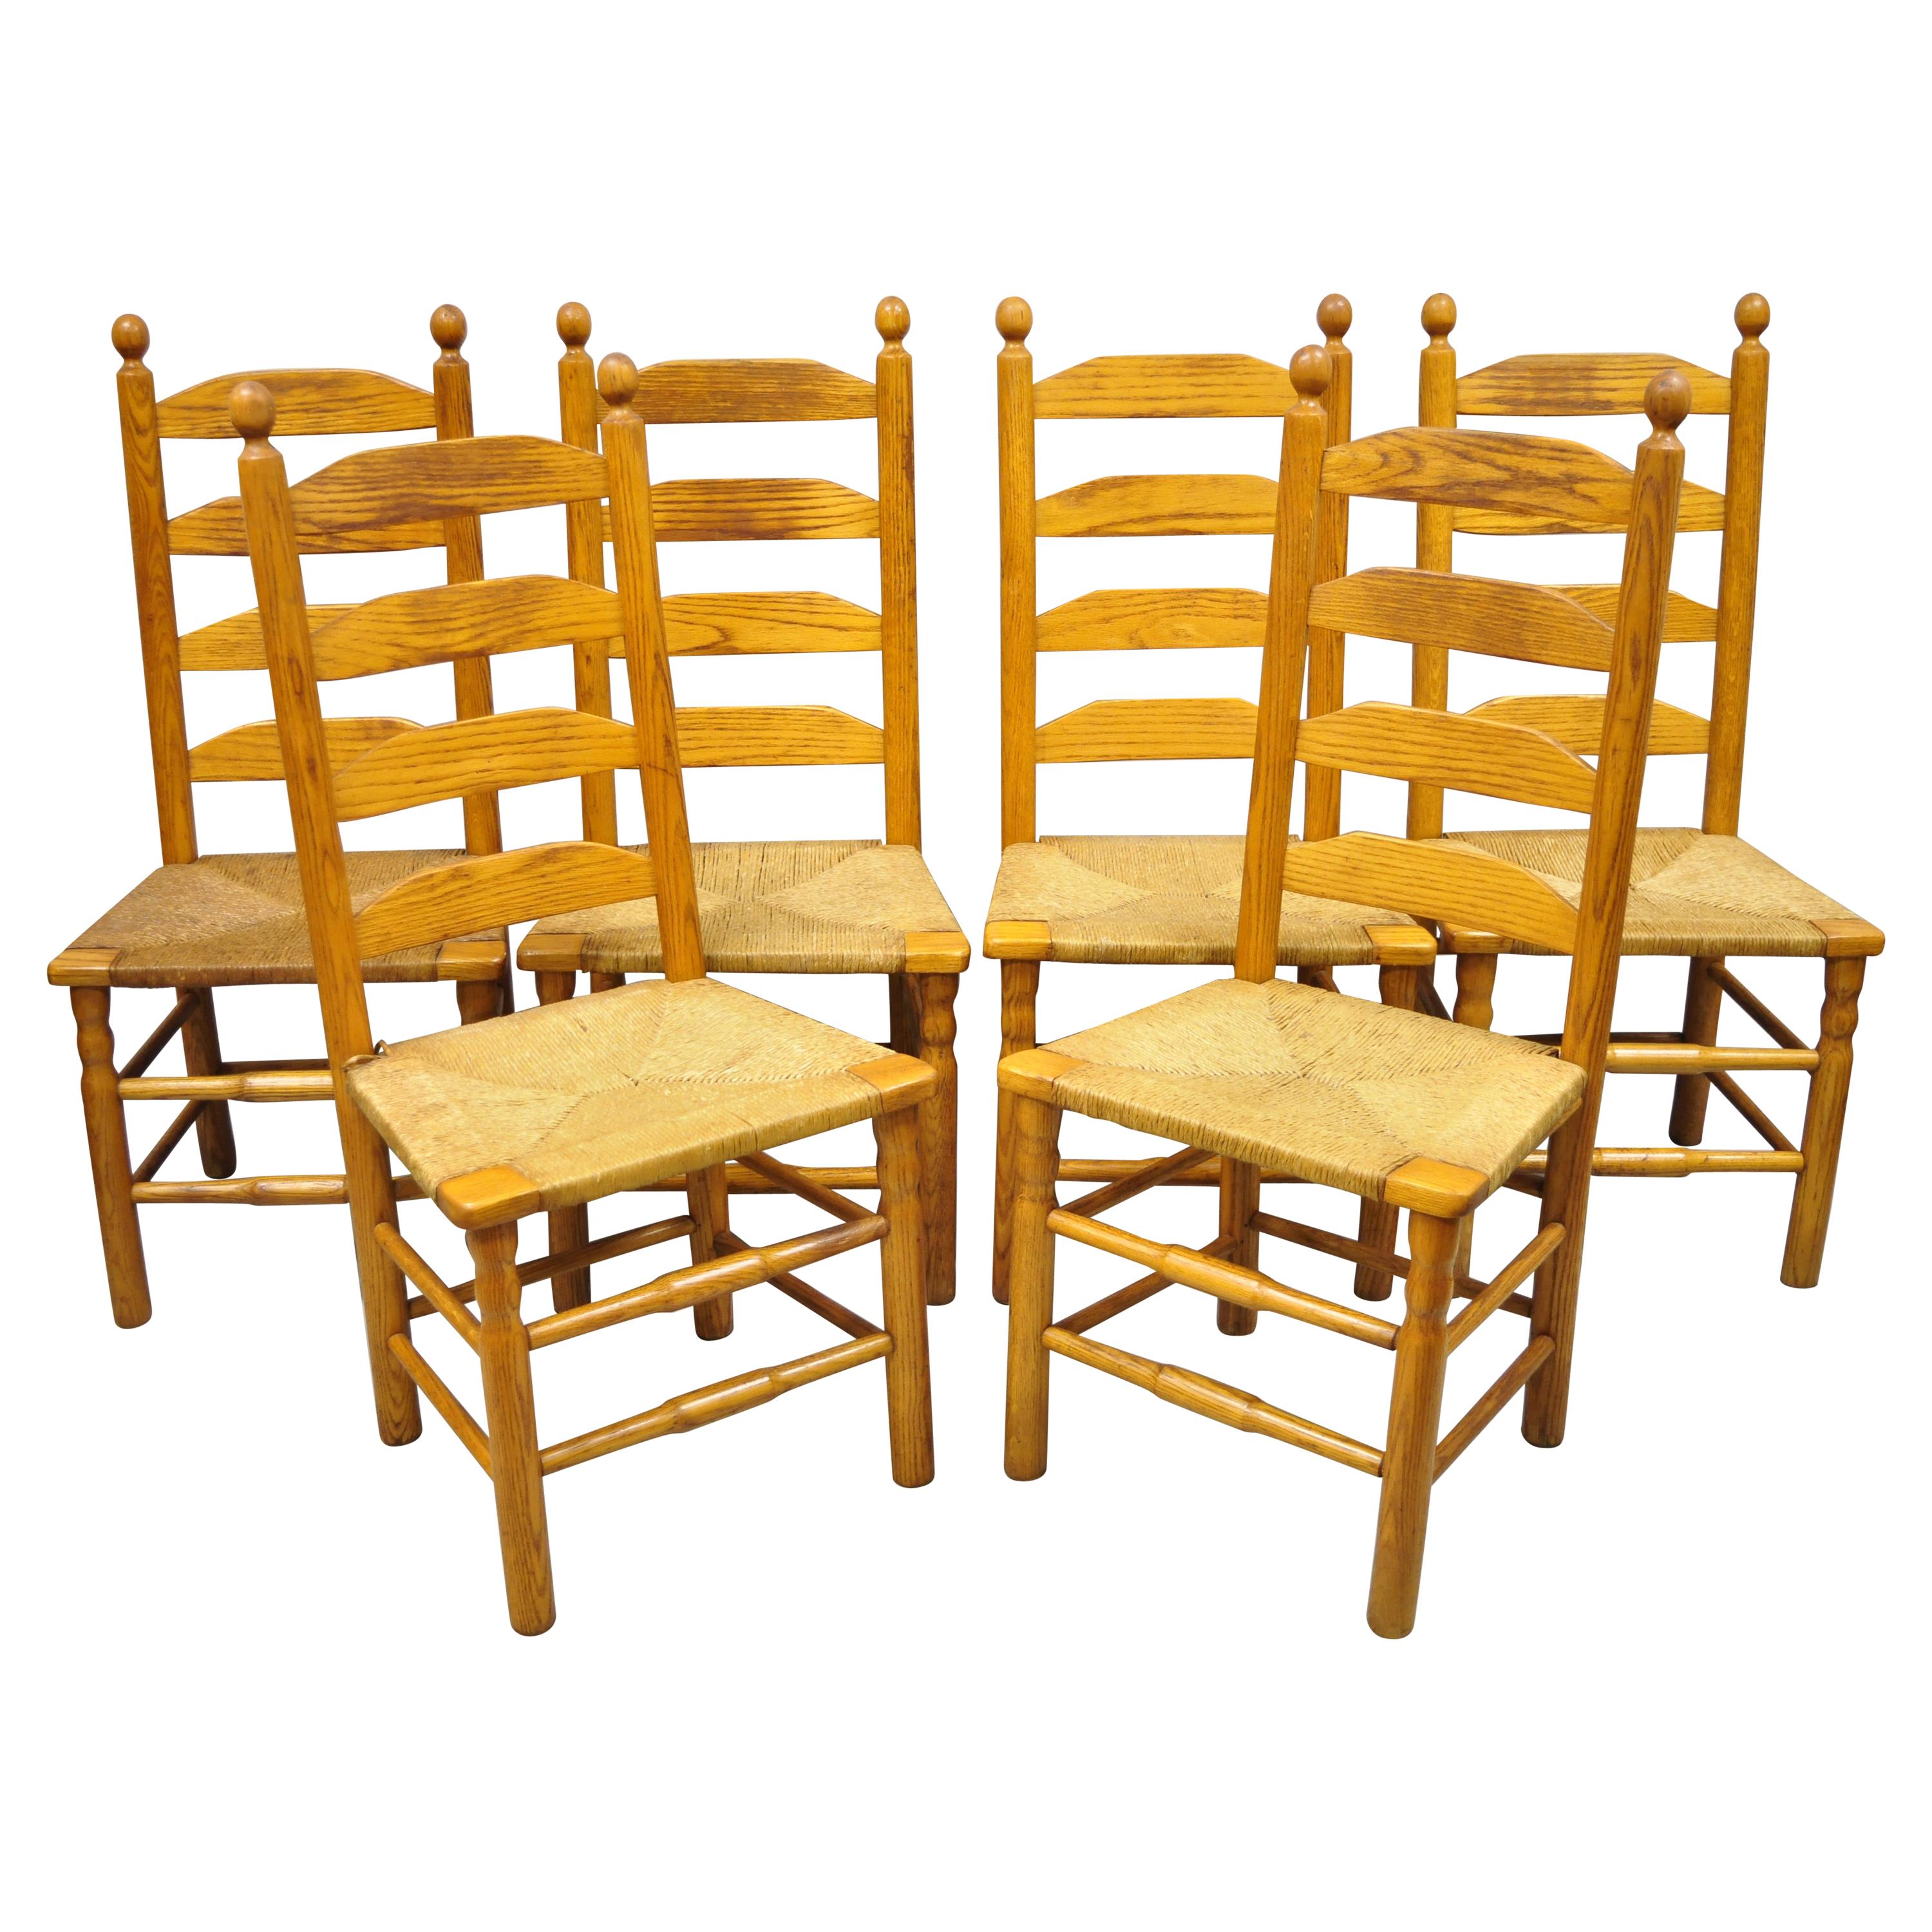 Vintage Oak Wood Rush Seat Tall Ladderback Dining Room Rustic Chairs, Set of 6